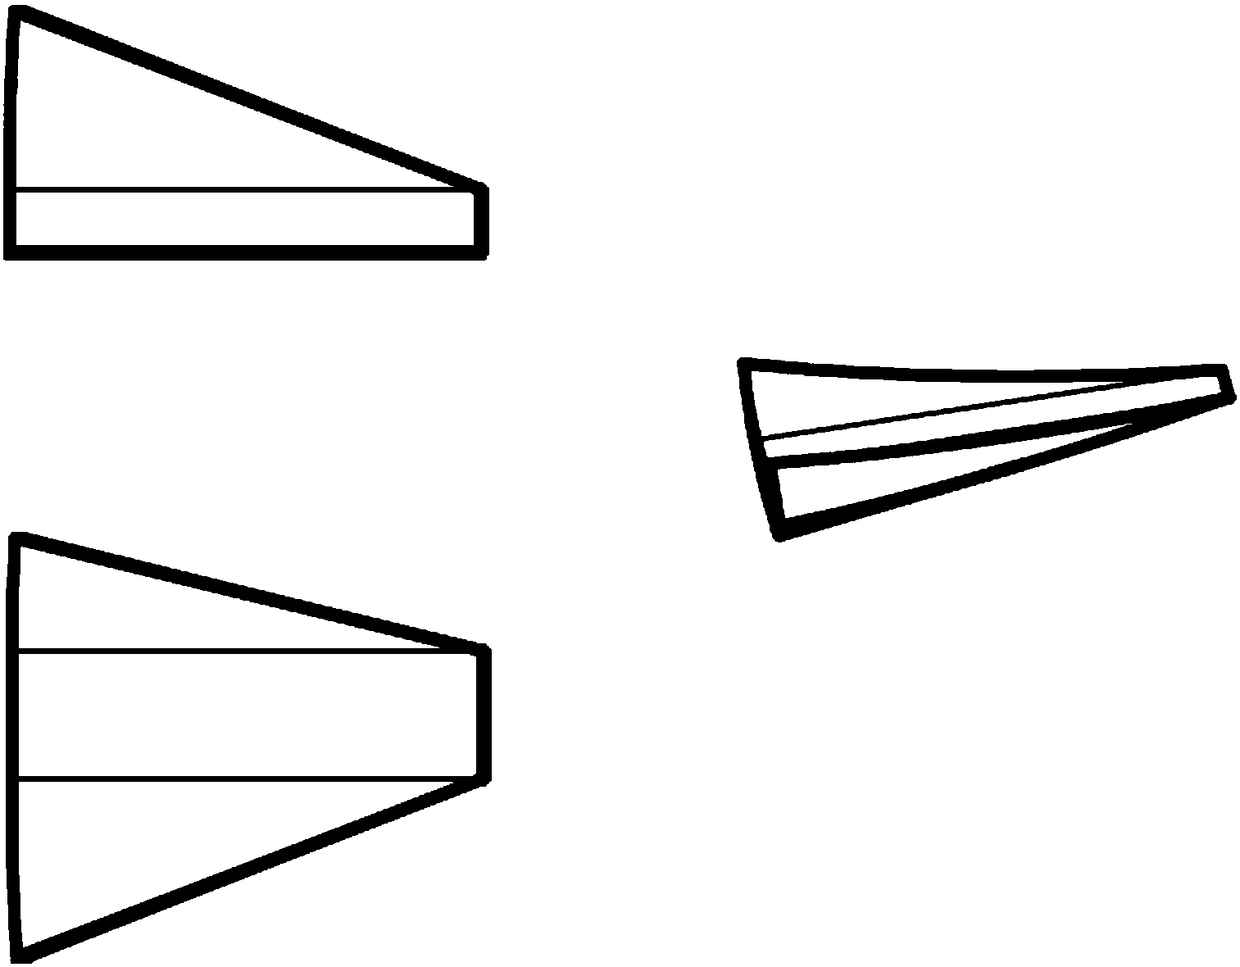 Three-hull planing boat provided with groove channel wave suppression plate